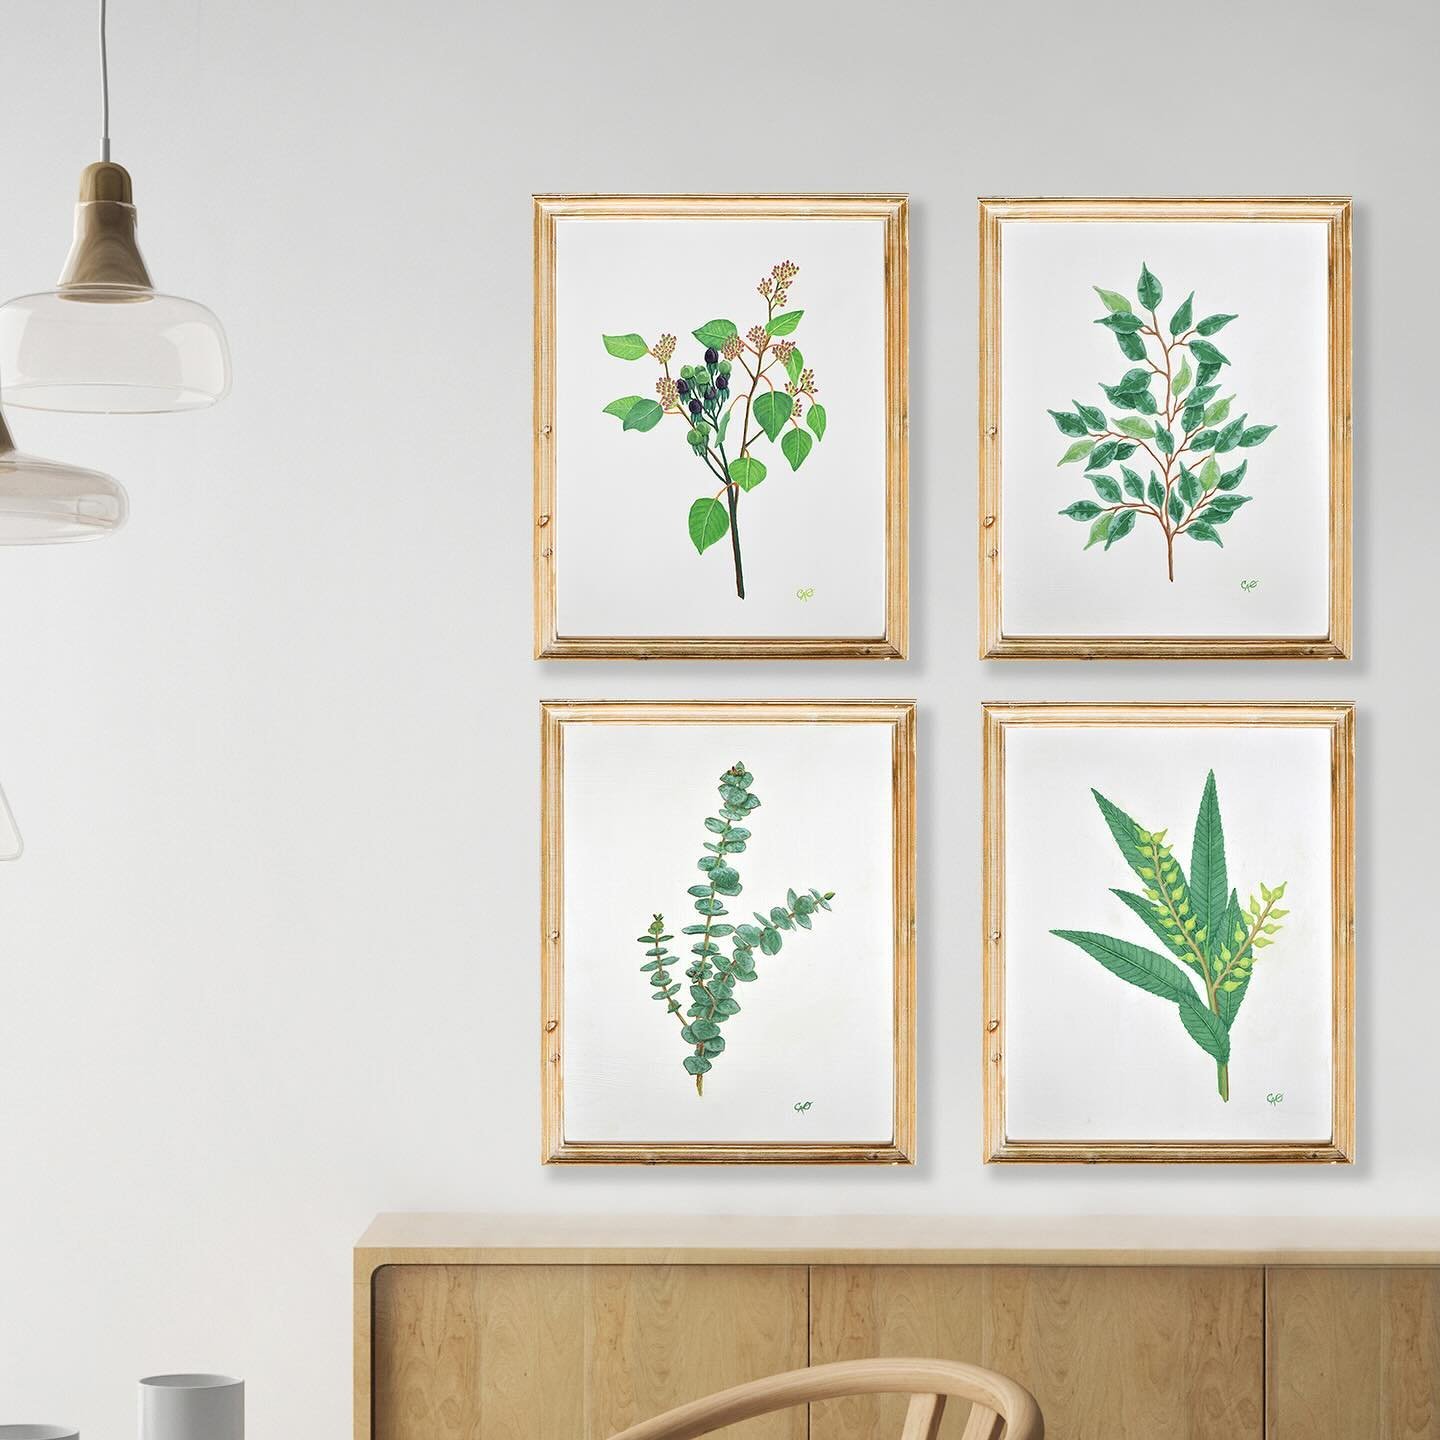 These annual (2024) Valentine&rsquo;s out-of-the-box creations are inspired by the romantic and simplistic rendered details depicted in botanical paintings. These four originals are for purchase individually or if available, as a set.
14 x 11 Inches,